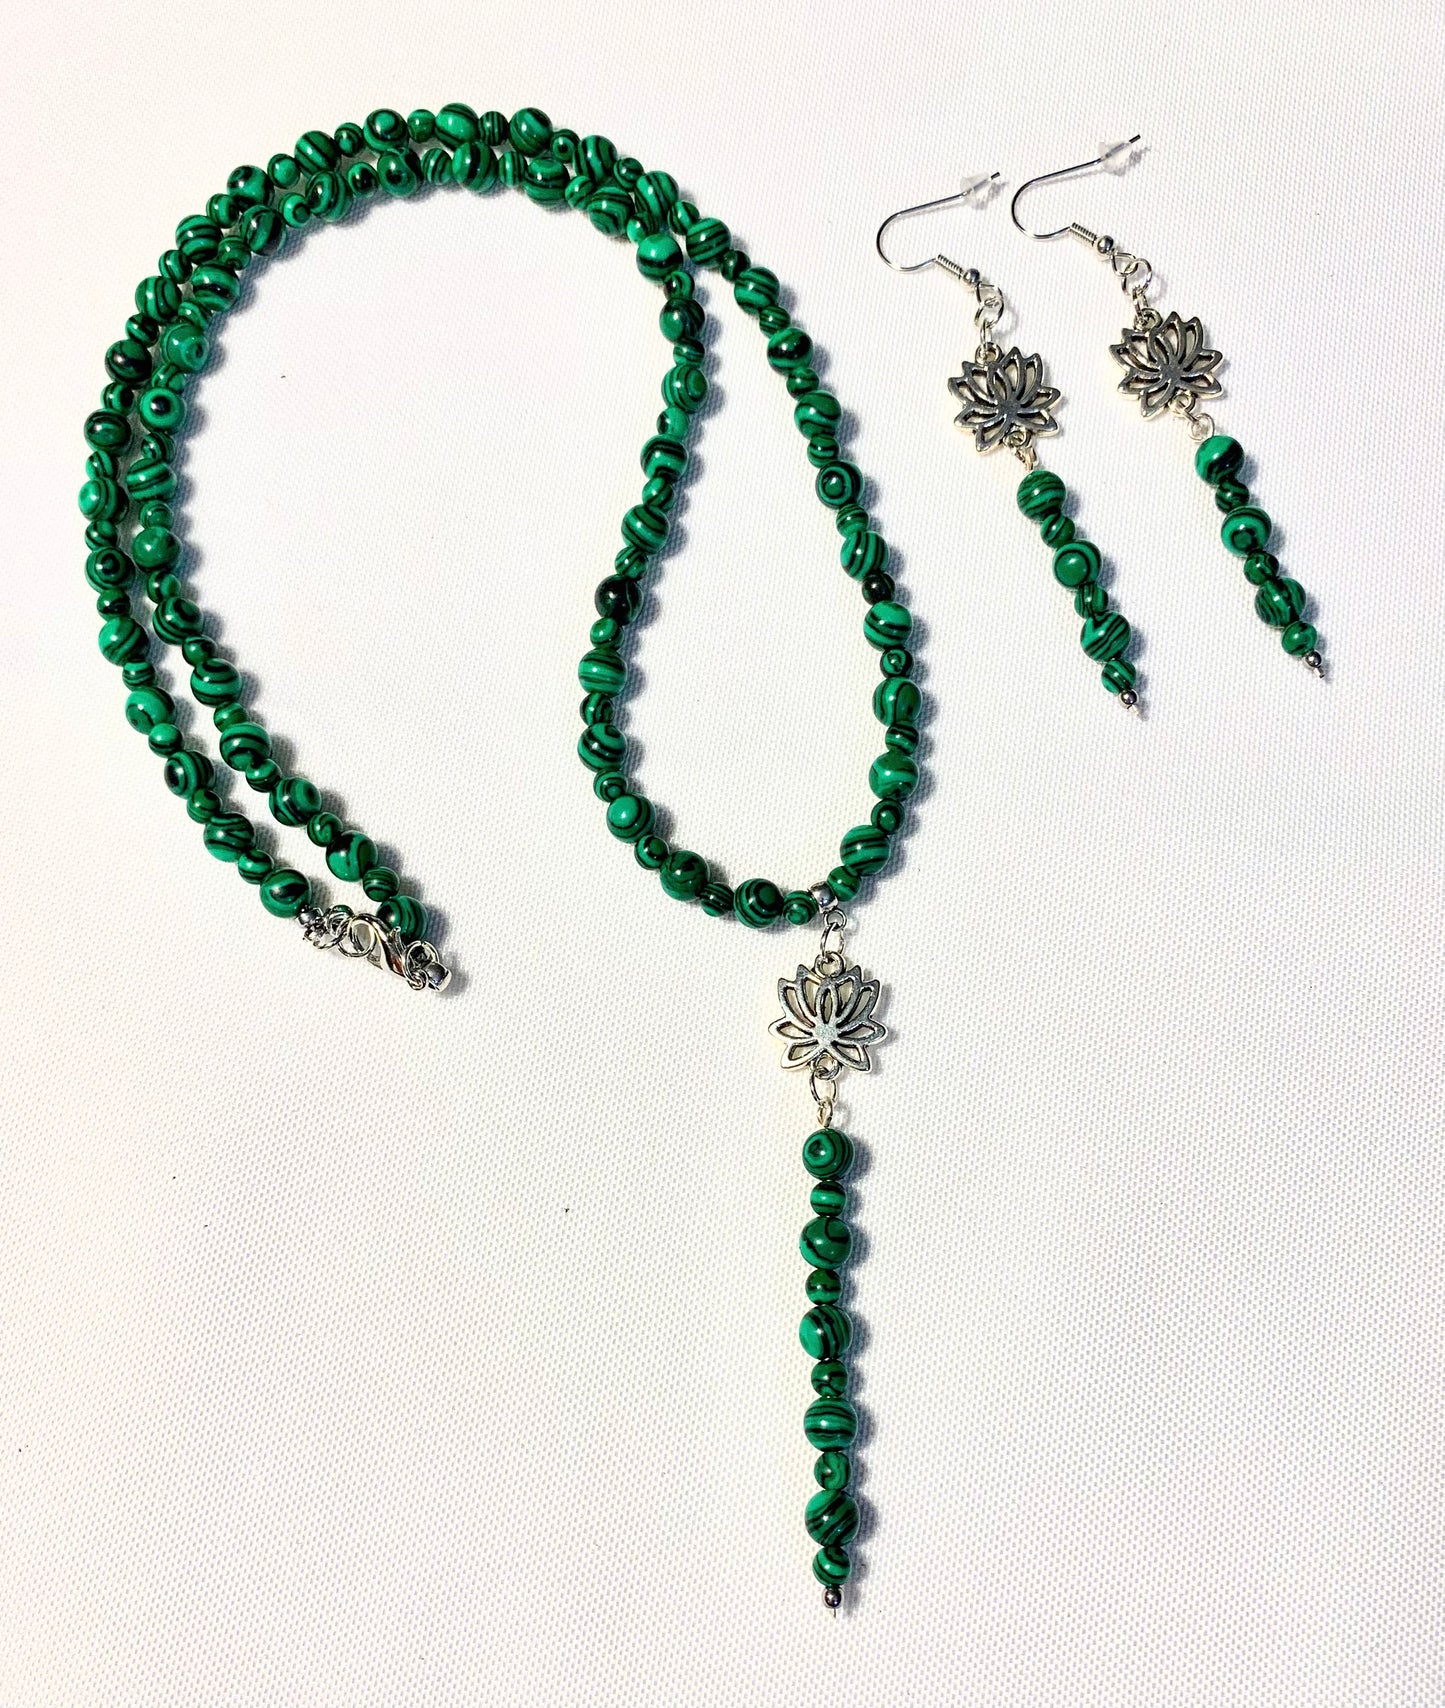 Aurora Handmade Malachite 23" Necklace and Earring Set with Lotus Flower Pendant